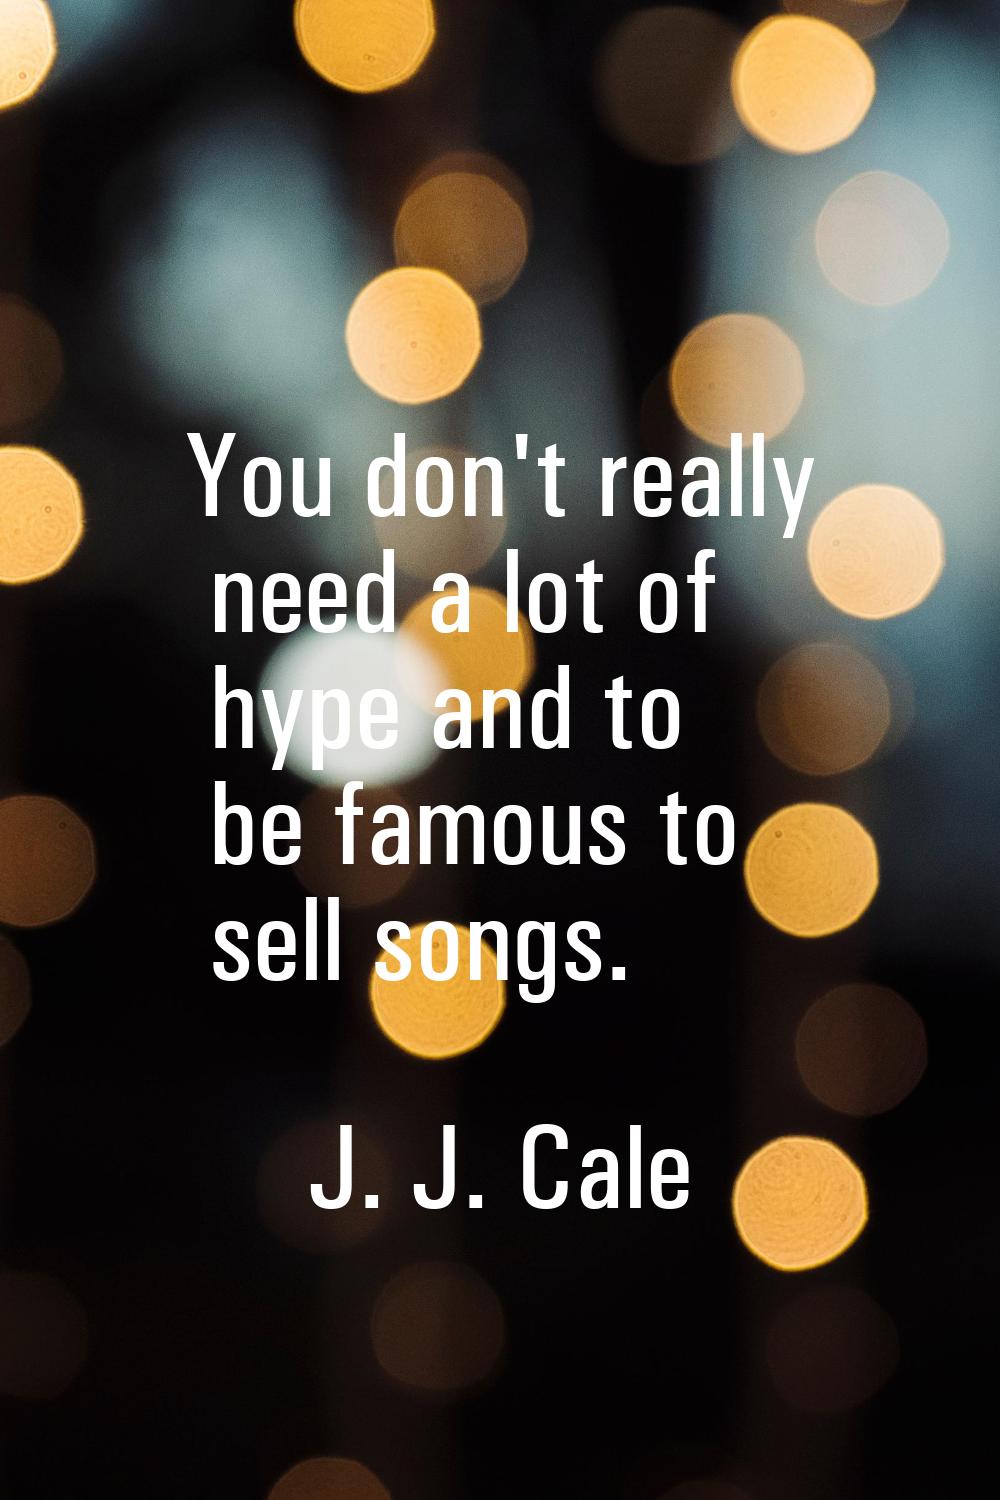 You don't really need a lot of hype and to be famous to sell songs.